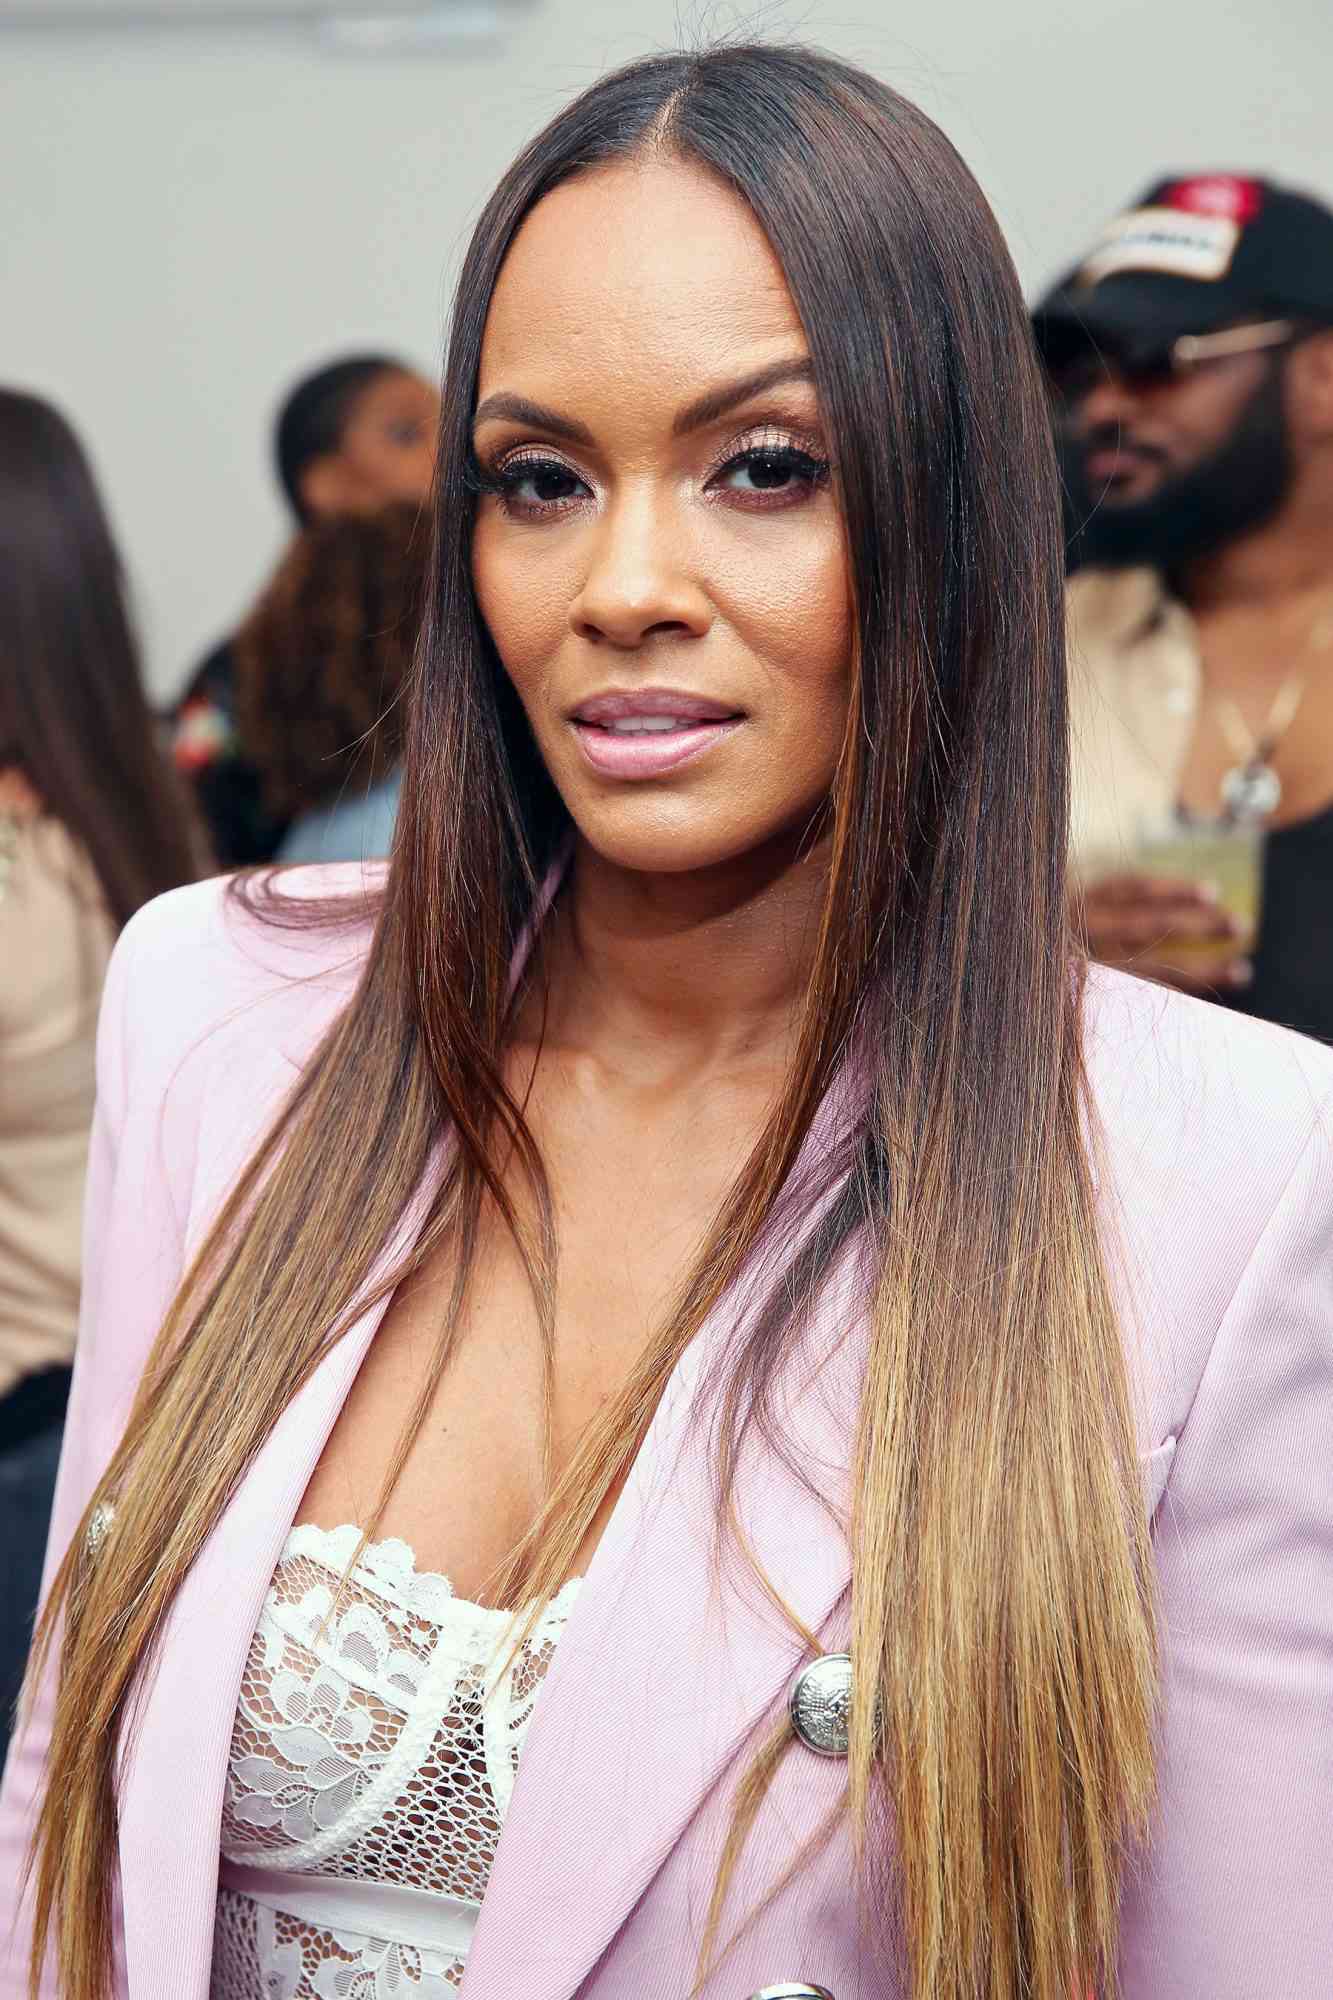 The 46-year old daughter of father (?) and mother(?) Evelyn Lozada in 2022 photo. Evelyn Lozada earned a  million dollar salary - leaving the net worth at  million in 2022